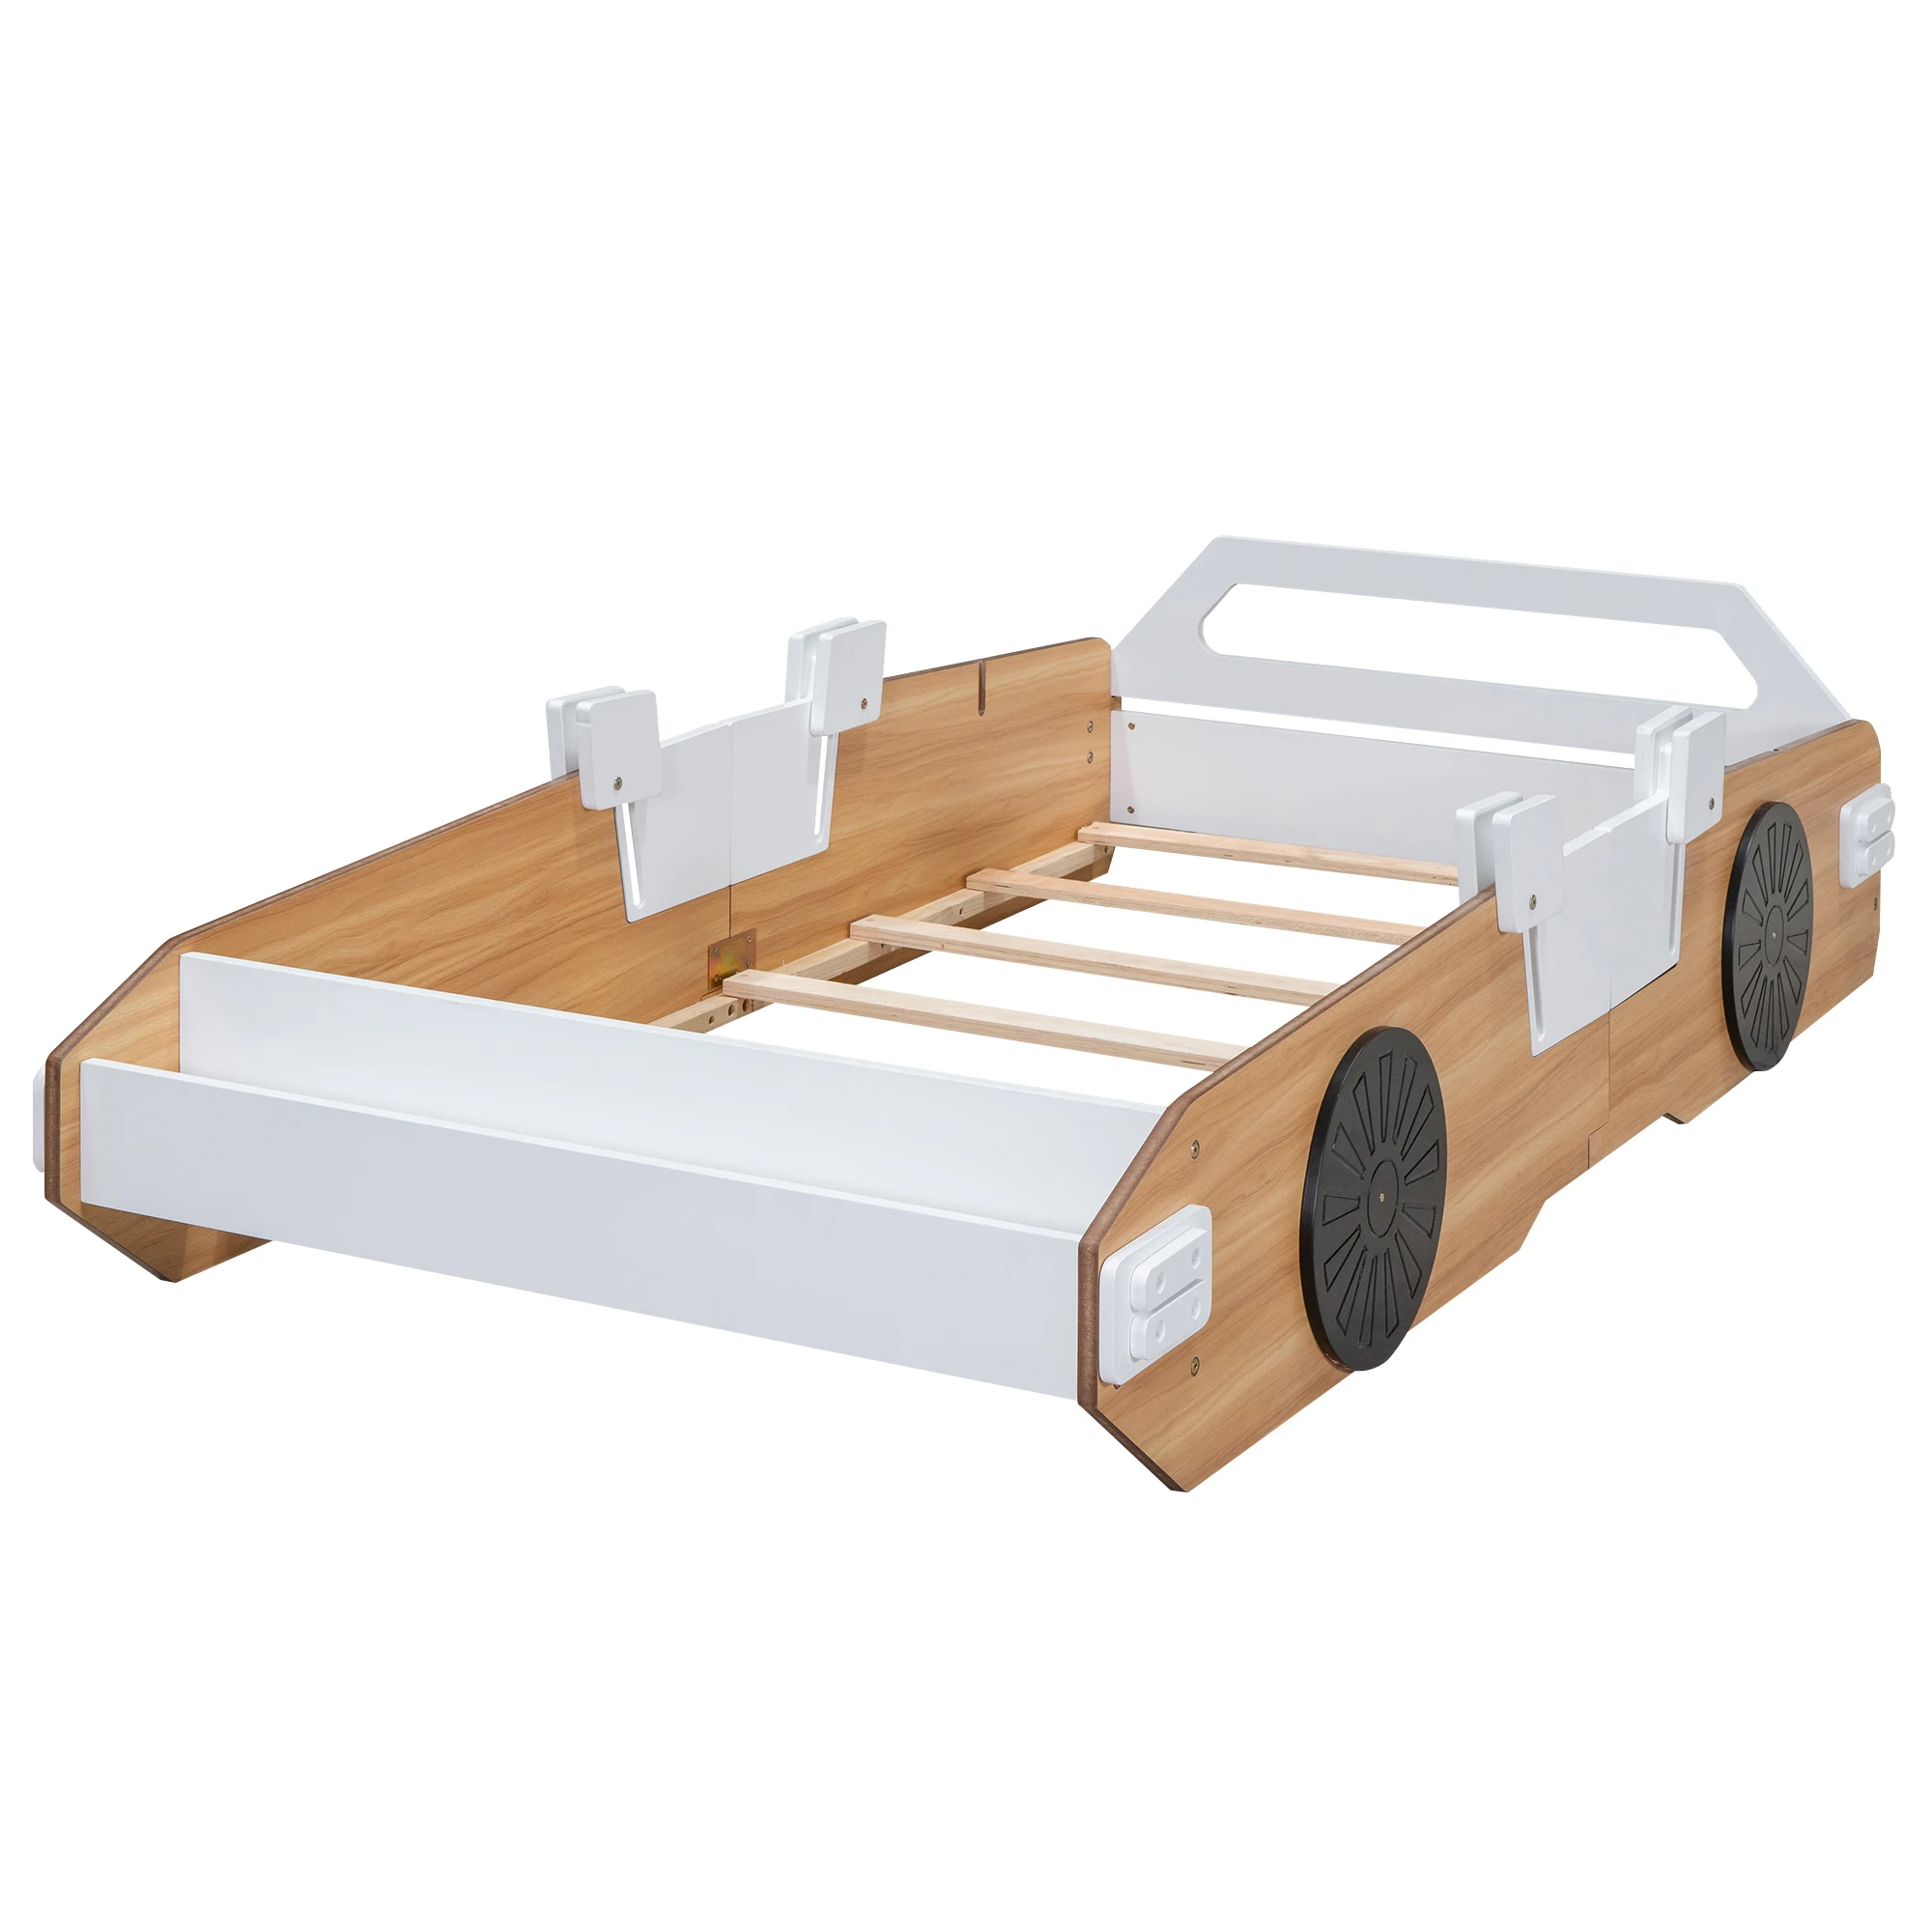 Wood Twin Size Racing Car Bed with Door Design and Storage, Natural+White+Black